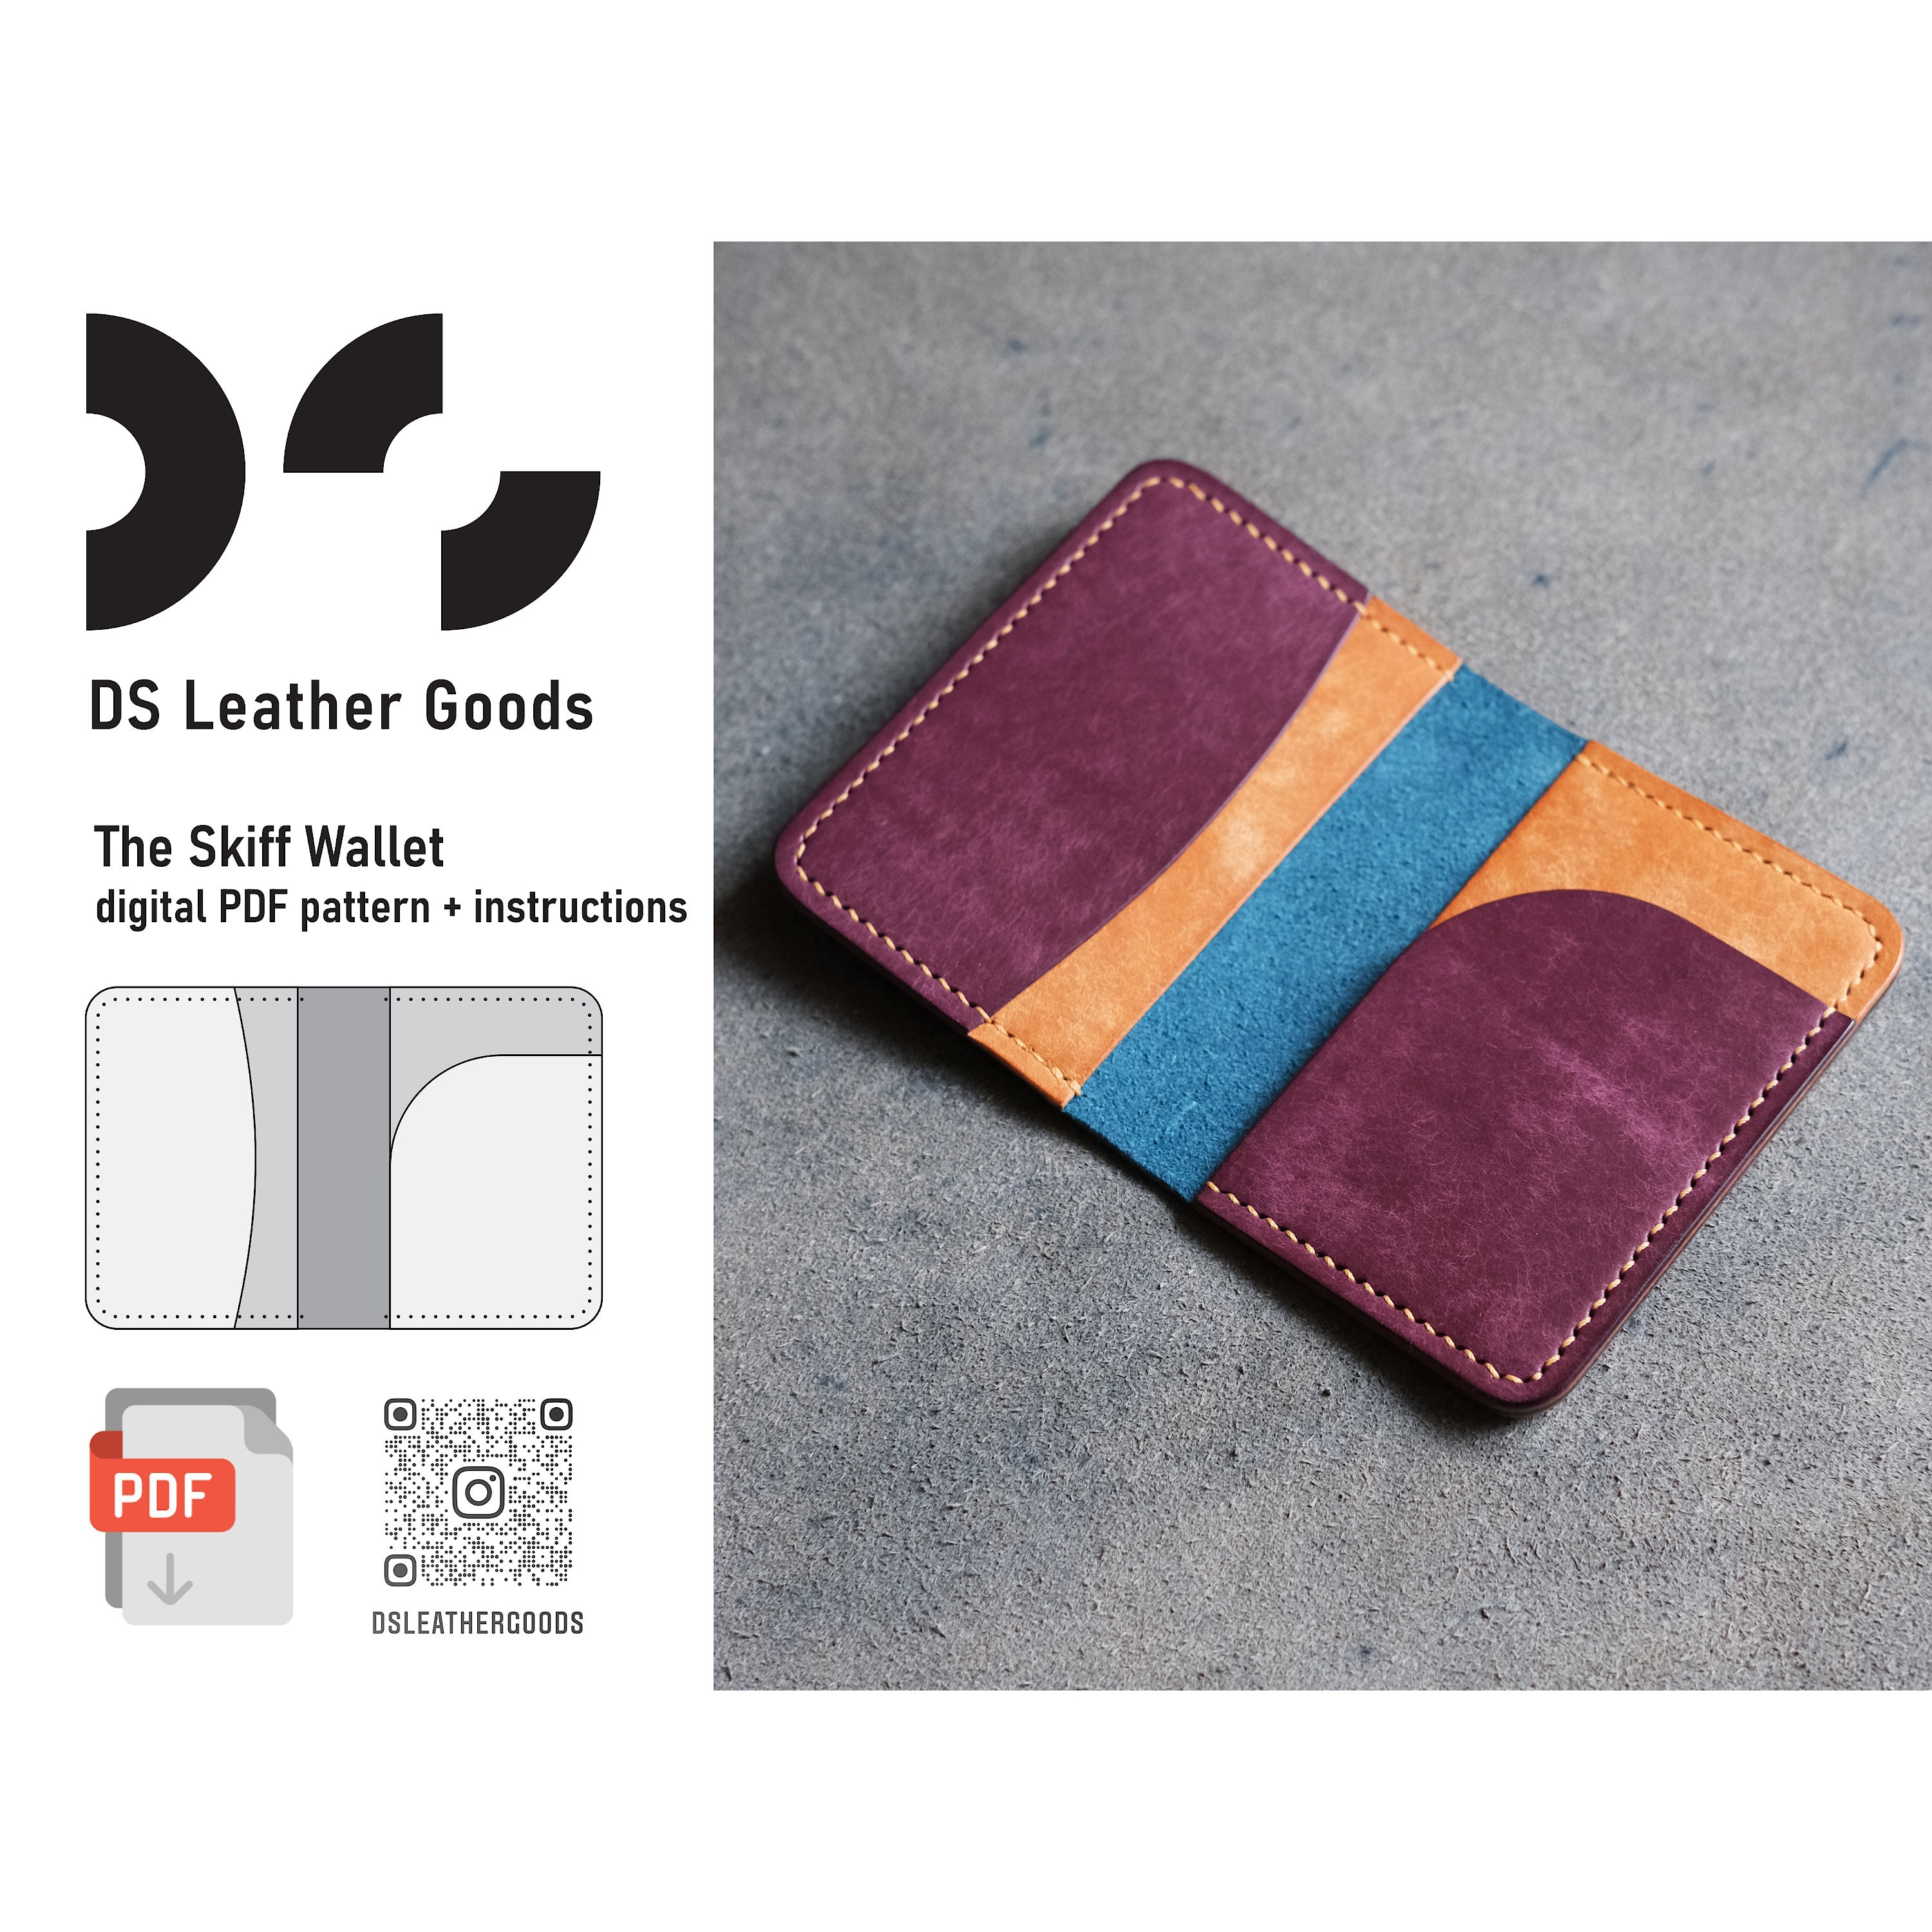 Lisa Wallet Monogram Canvas - Wallets and Small Leather Goods